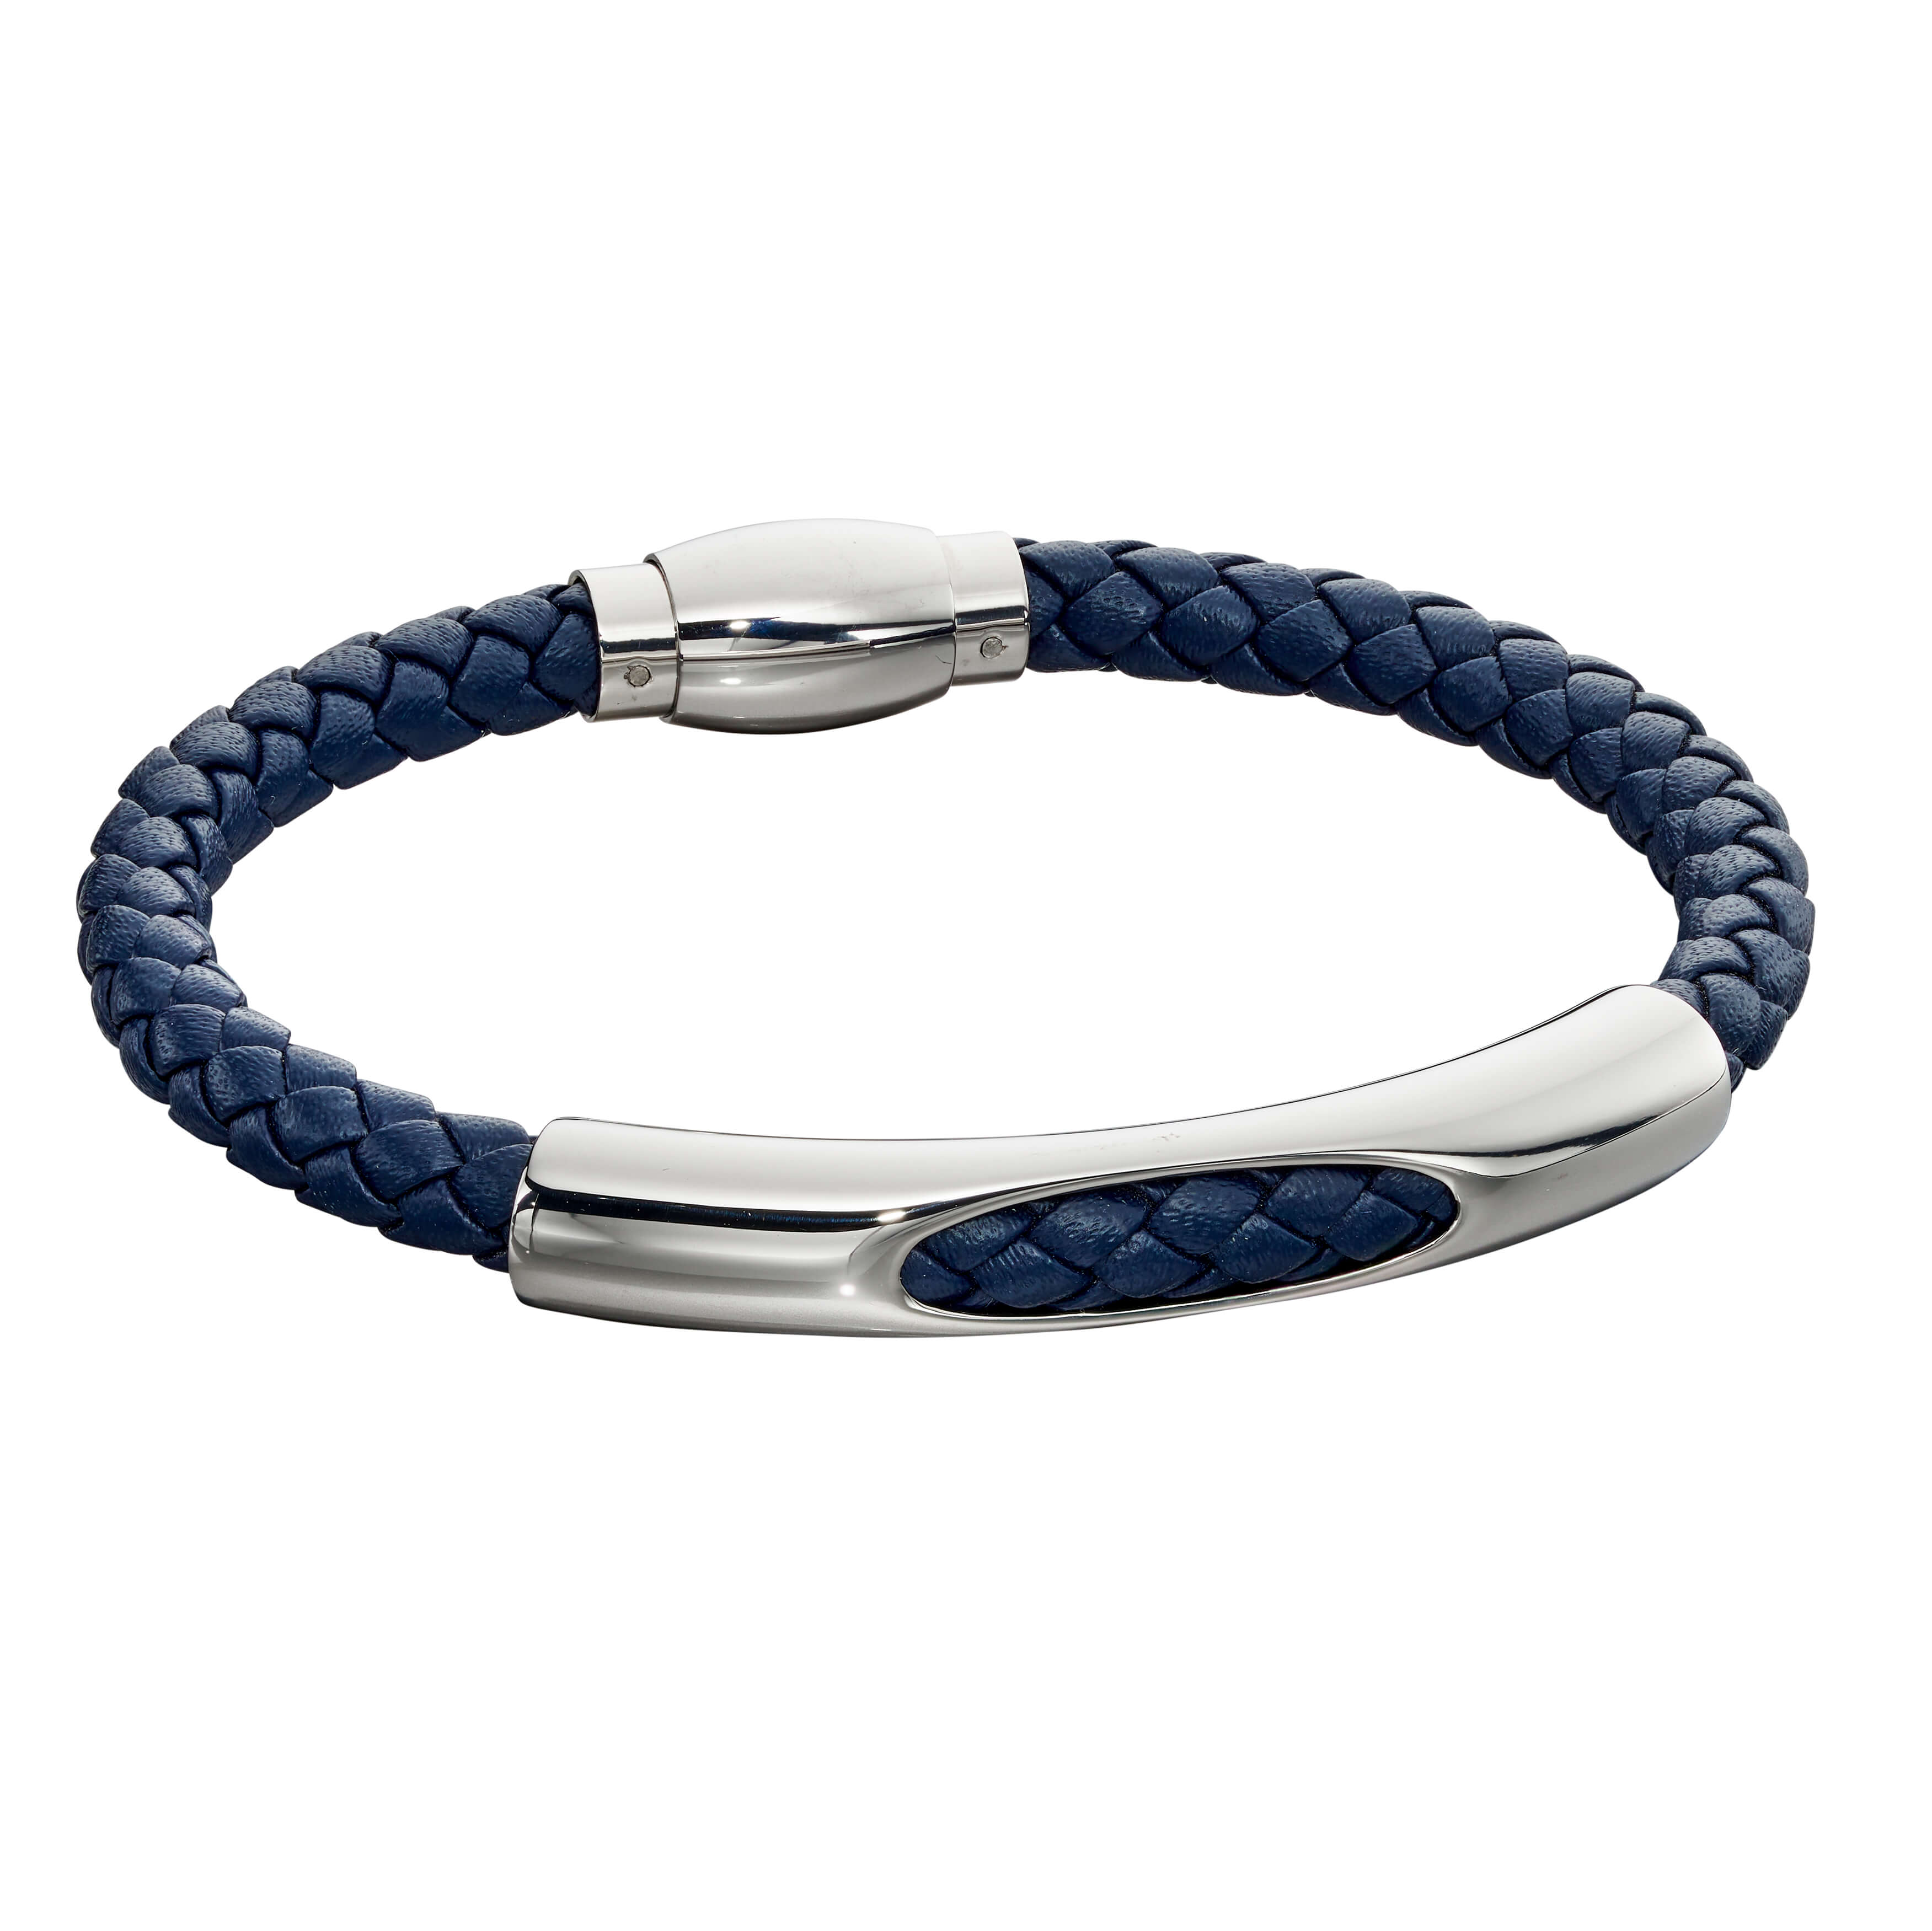 Stainless Steel & Navy Woven Leather Bracelet - FB0004 - Hallmark Jewellers Formby & The Jewellers Bench Widnes